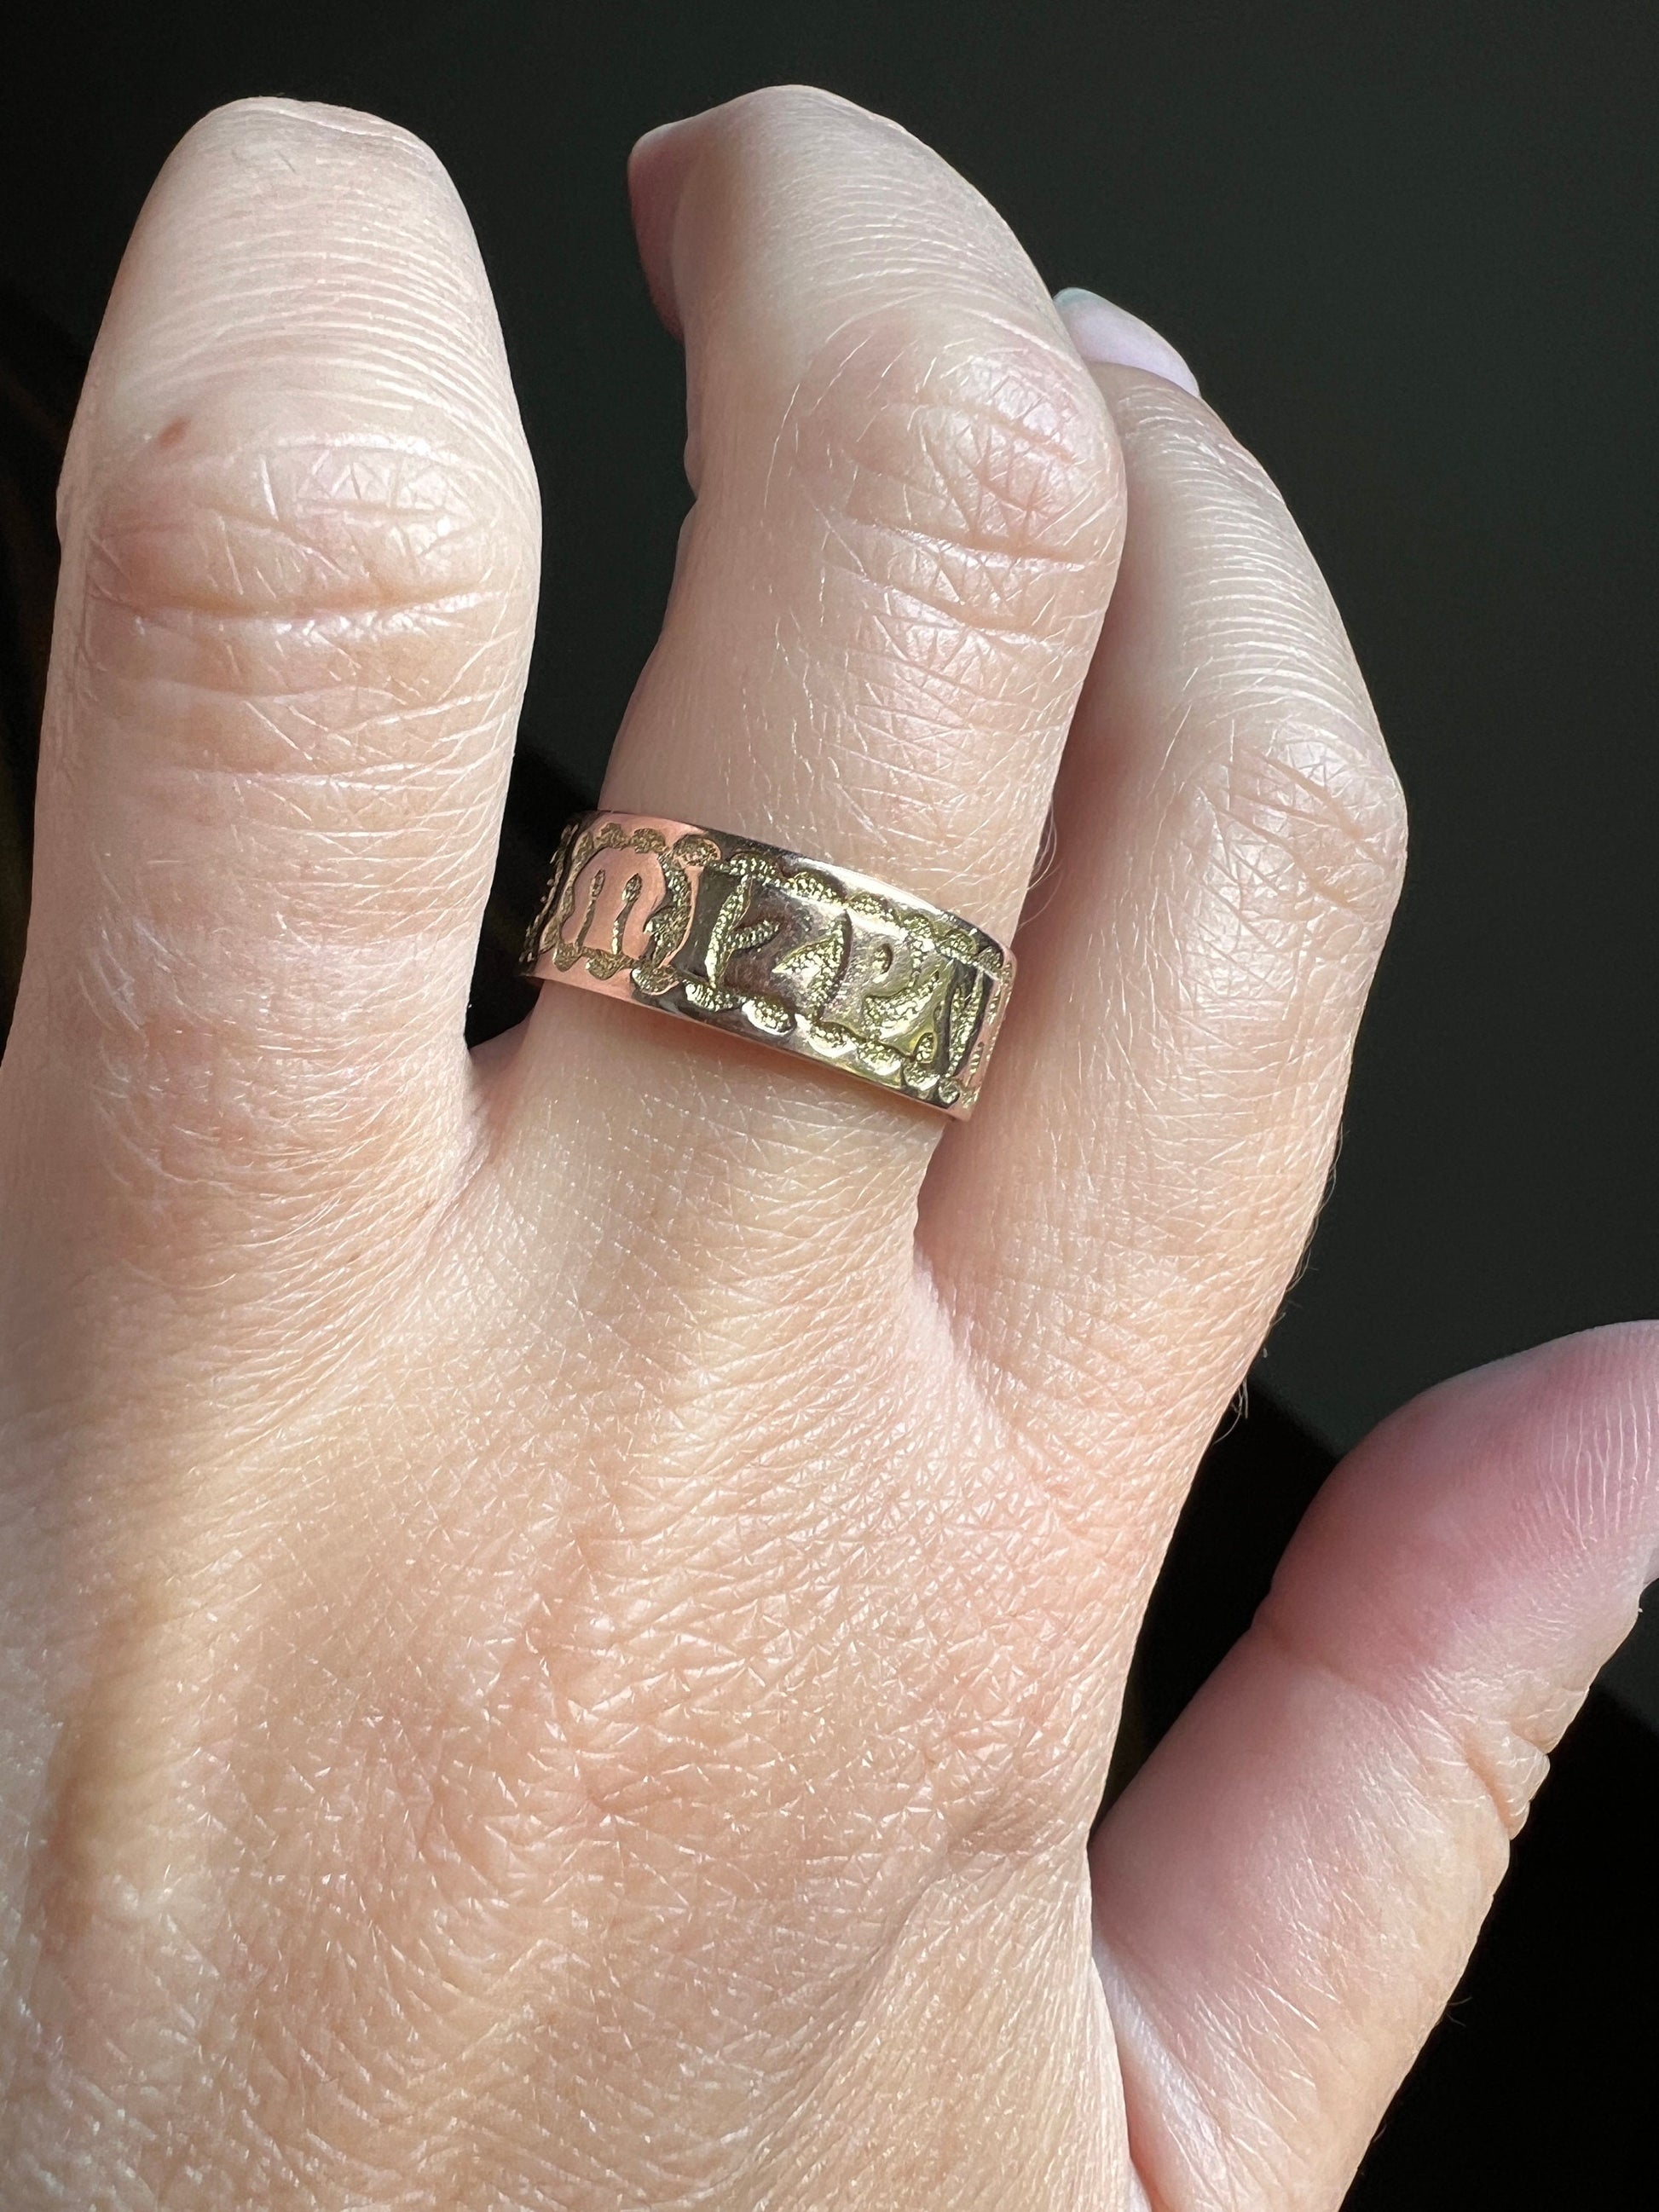 MIZPAH Antique Victorian Gothic Font c1883 Band Wide Ring 9k Rose & Yellow Gold Romantic Gift Jewelry with Words Pebble Texture Background